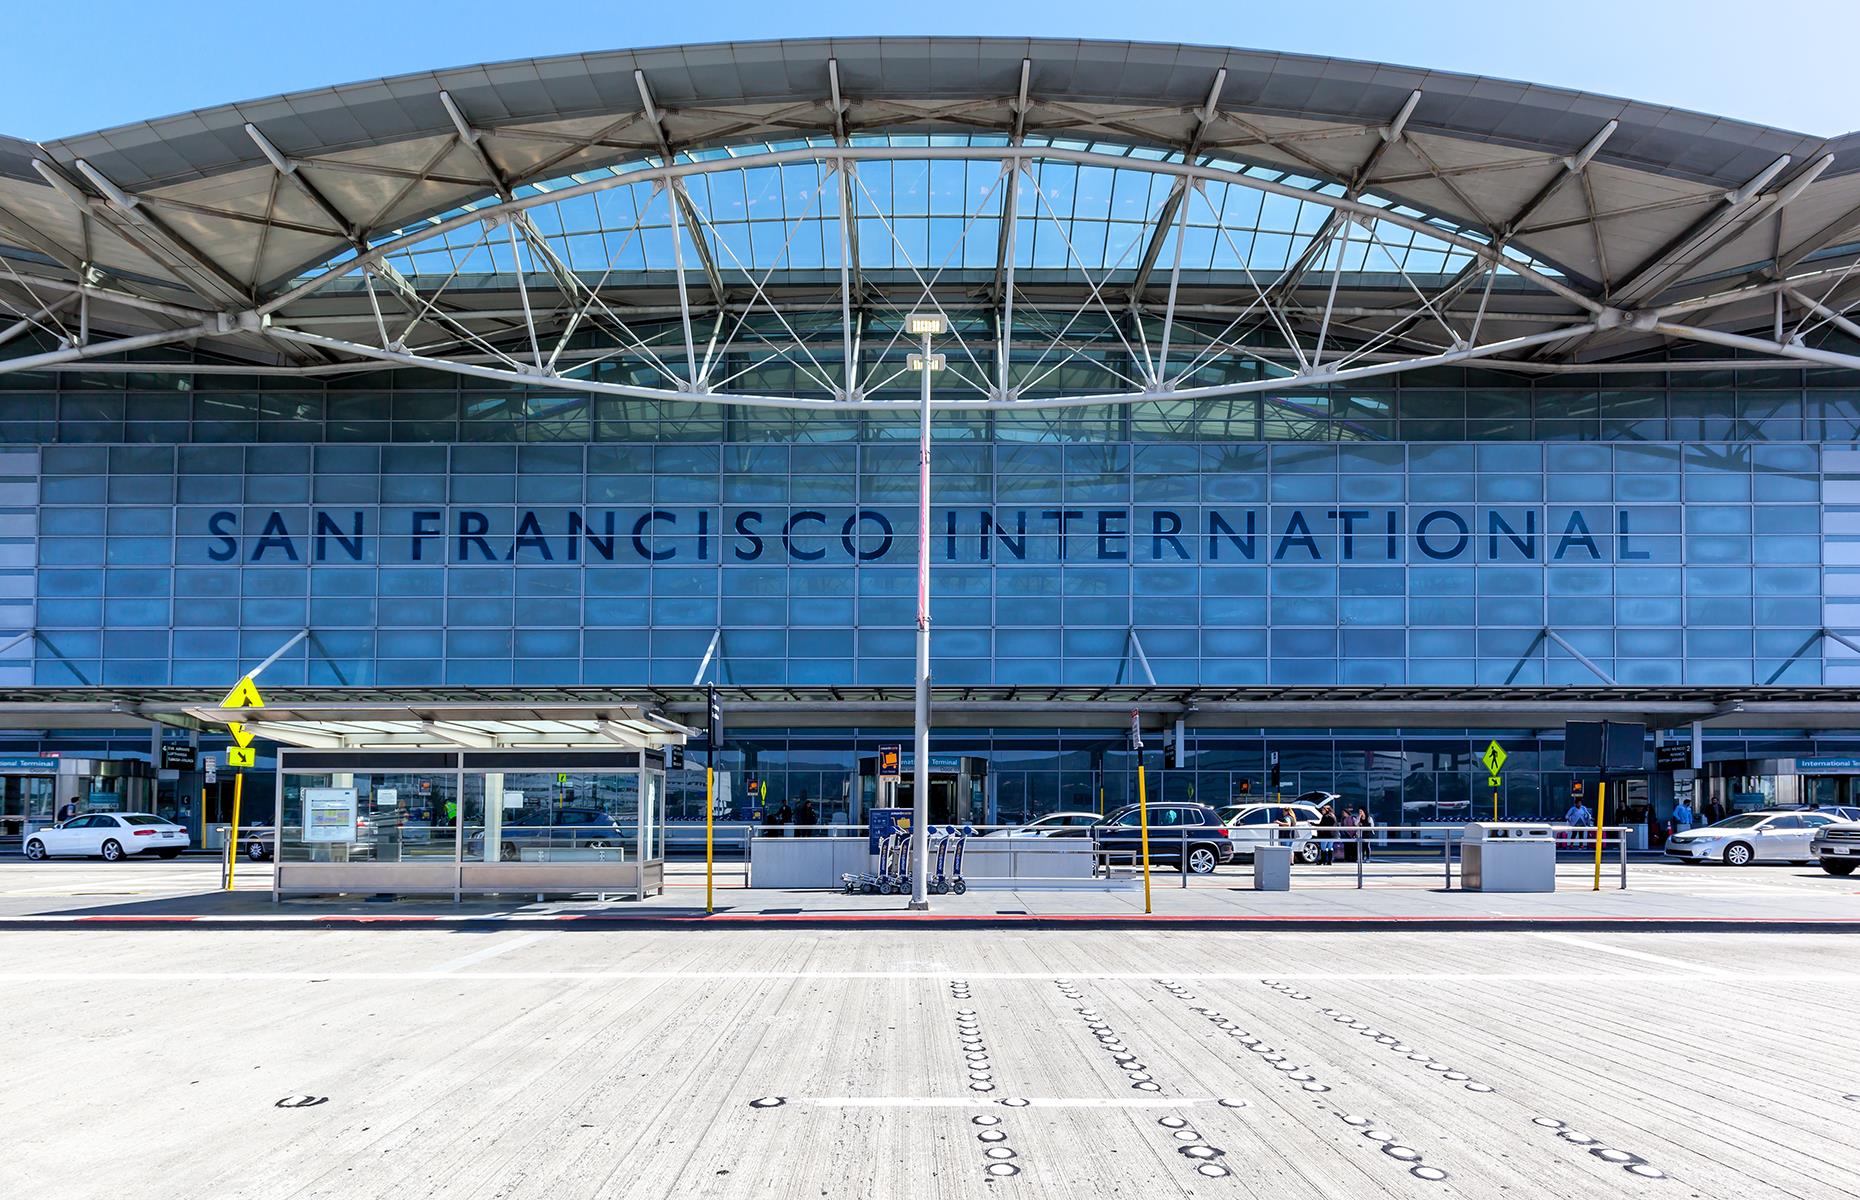 <p>The largest of the three main airports in the Bay Area, San Francisco International is a busy gateway to Europe and Asia. International visitors can face major delays with immigration and security which may be why this airport has been rated slightly below average, scoring 774 points.</p>  <p><a href="https://www.loveexploring.com/guides/107534/san-francisco-neighbourhoods-haight-ashbury-fishermans-wharf-mission-district"><strong>Inspired to get away? These are San Francisco's top neighborhoods</strong></a></p>